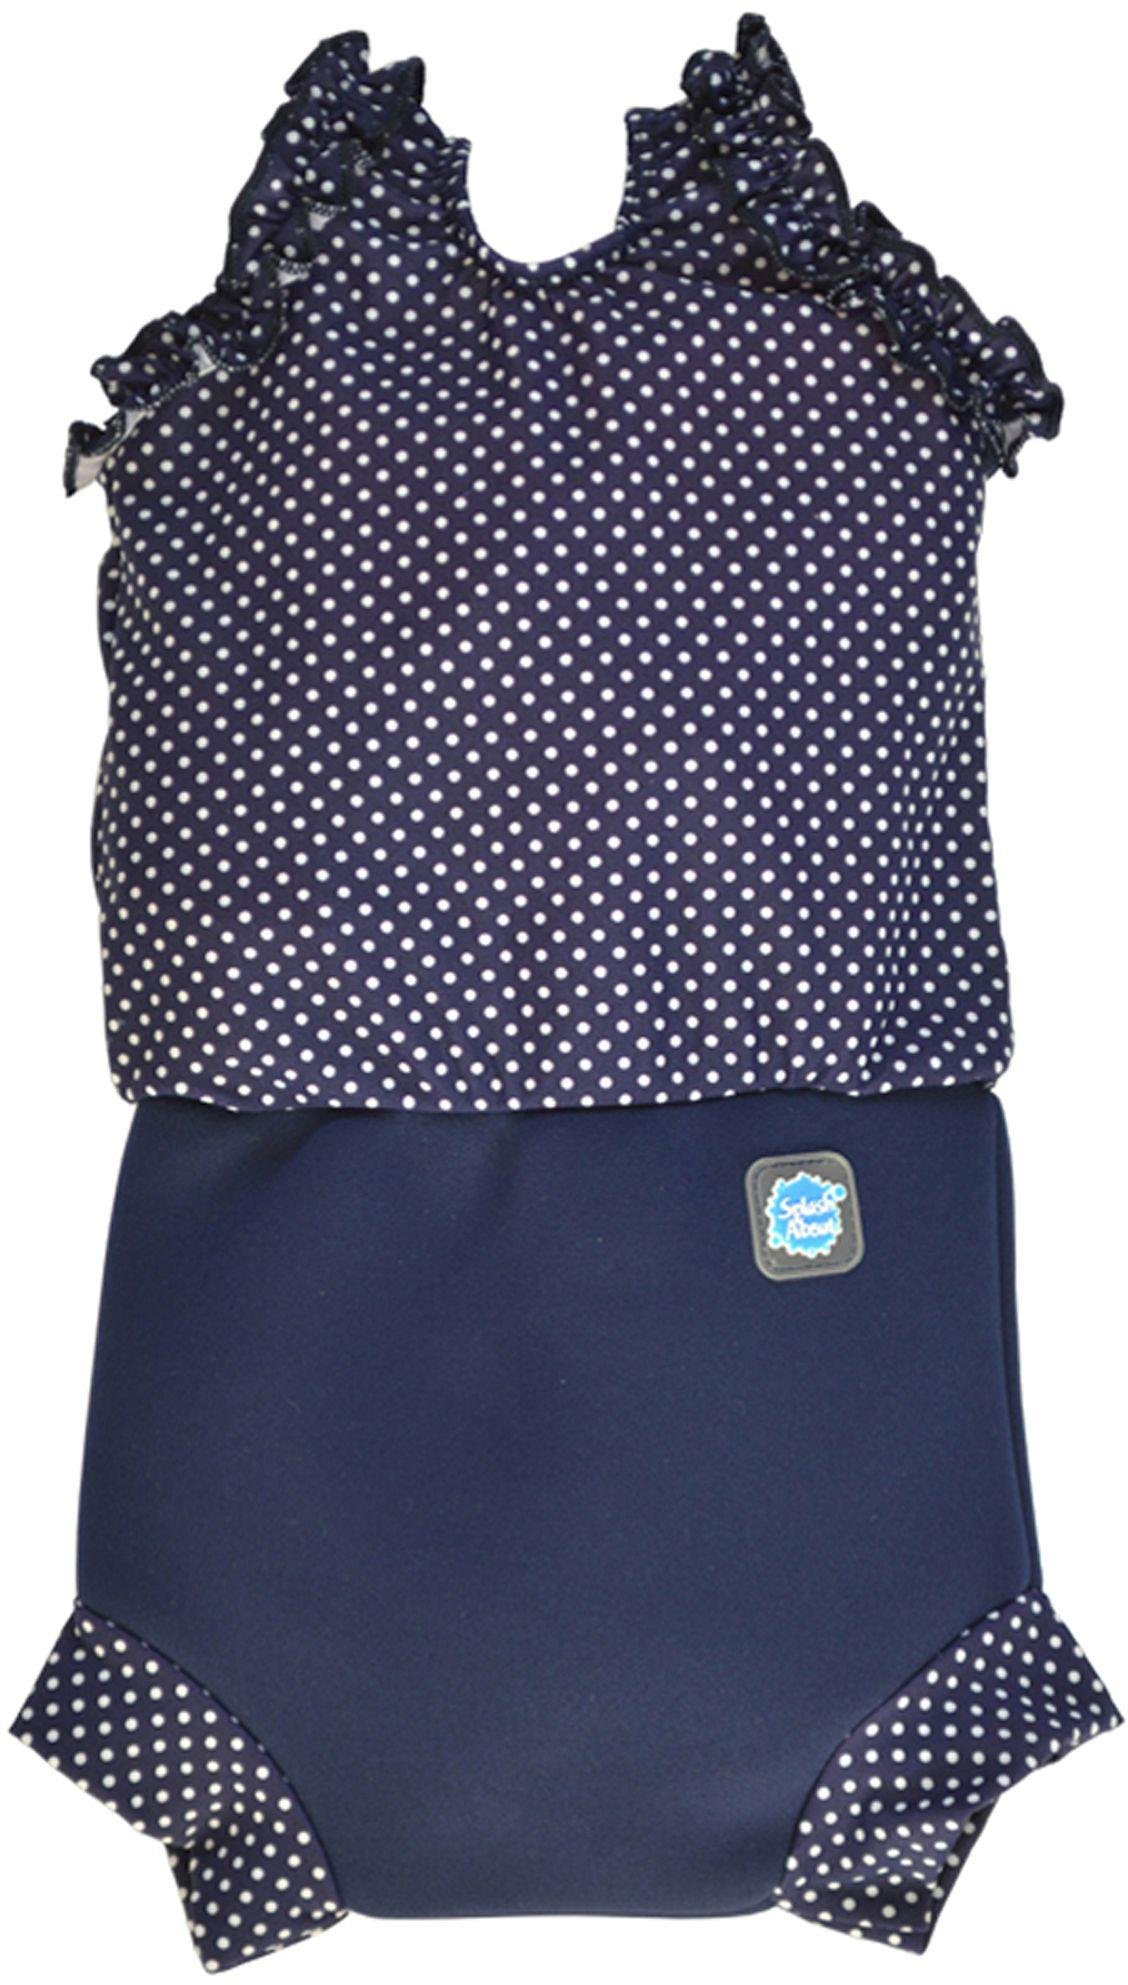 Splash About Happy Nappy Costume XL 12-24 months Navy Dot. Review